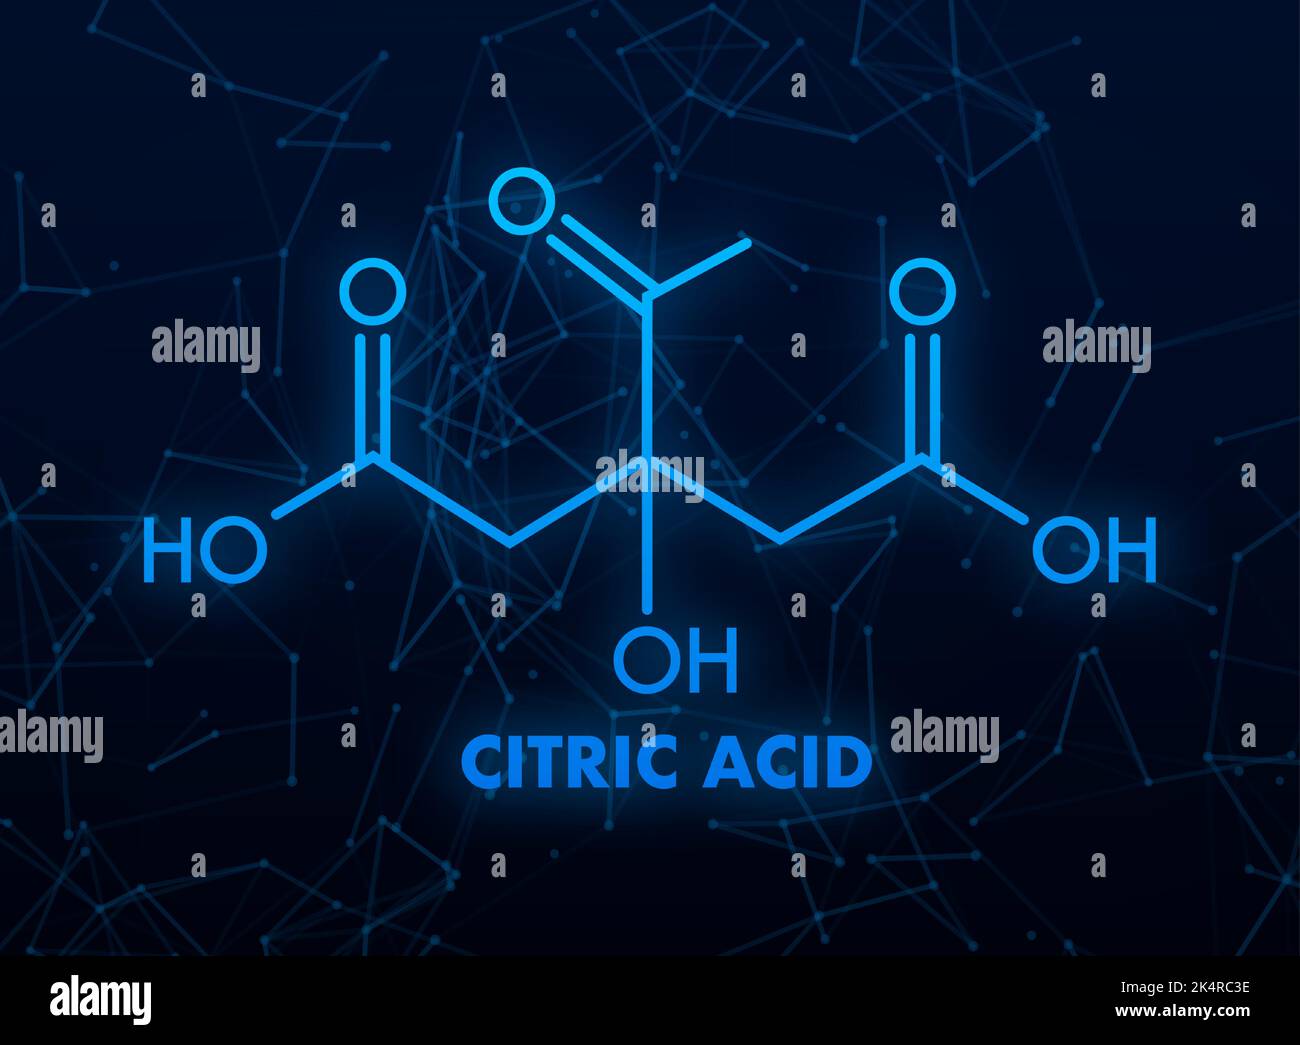 Citric acid concept chemical formula icon label, text font vector illustration Stock Vector